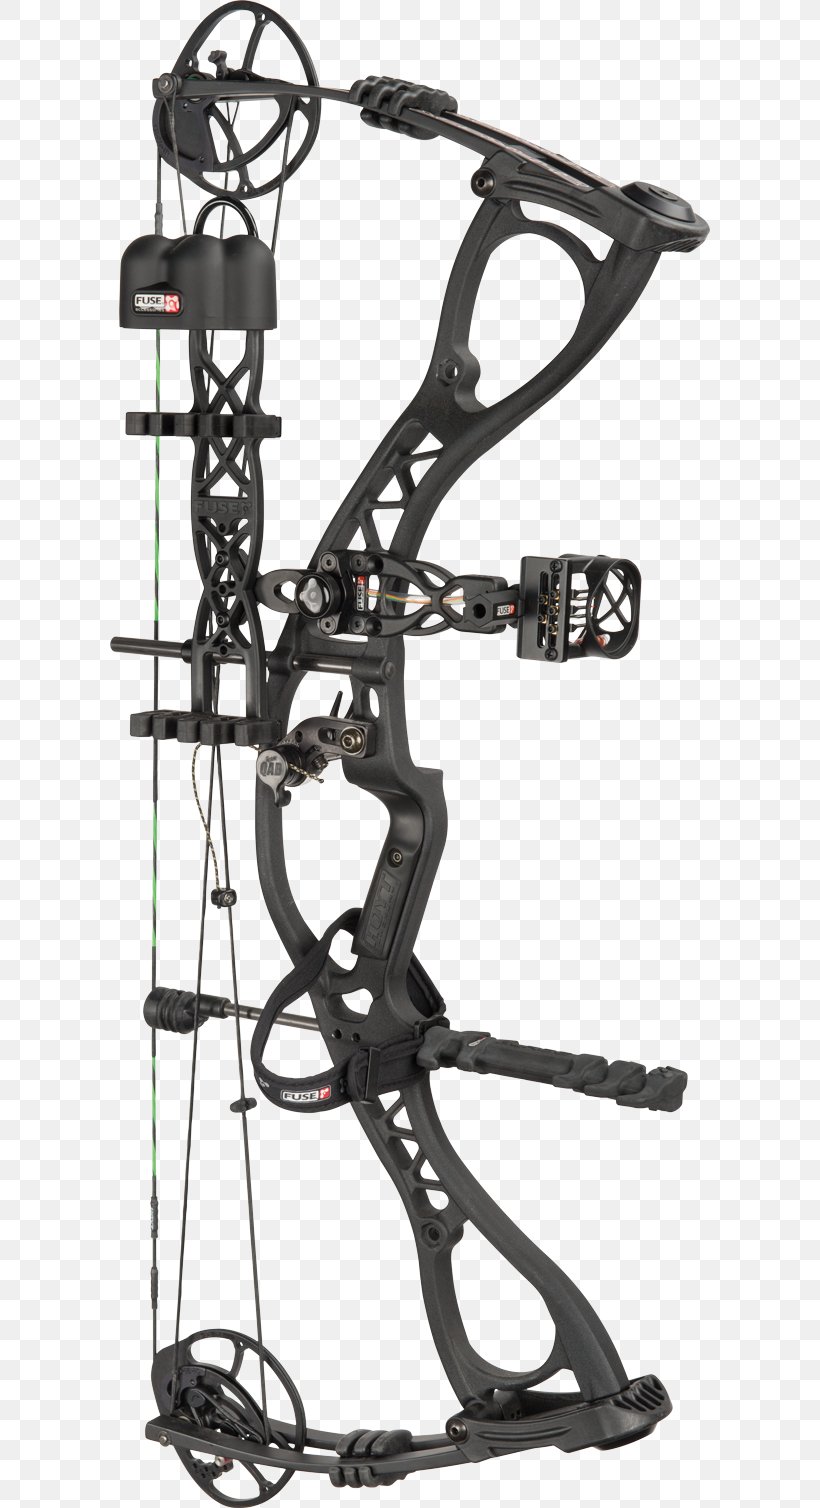 Compound Bows Archery Recurve Bow Bow And Arrow, PNG, 600x1508px, 2018 Dodge Charger, Compound Bows, Archery, Auto Part, Bow Download Free